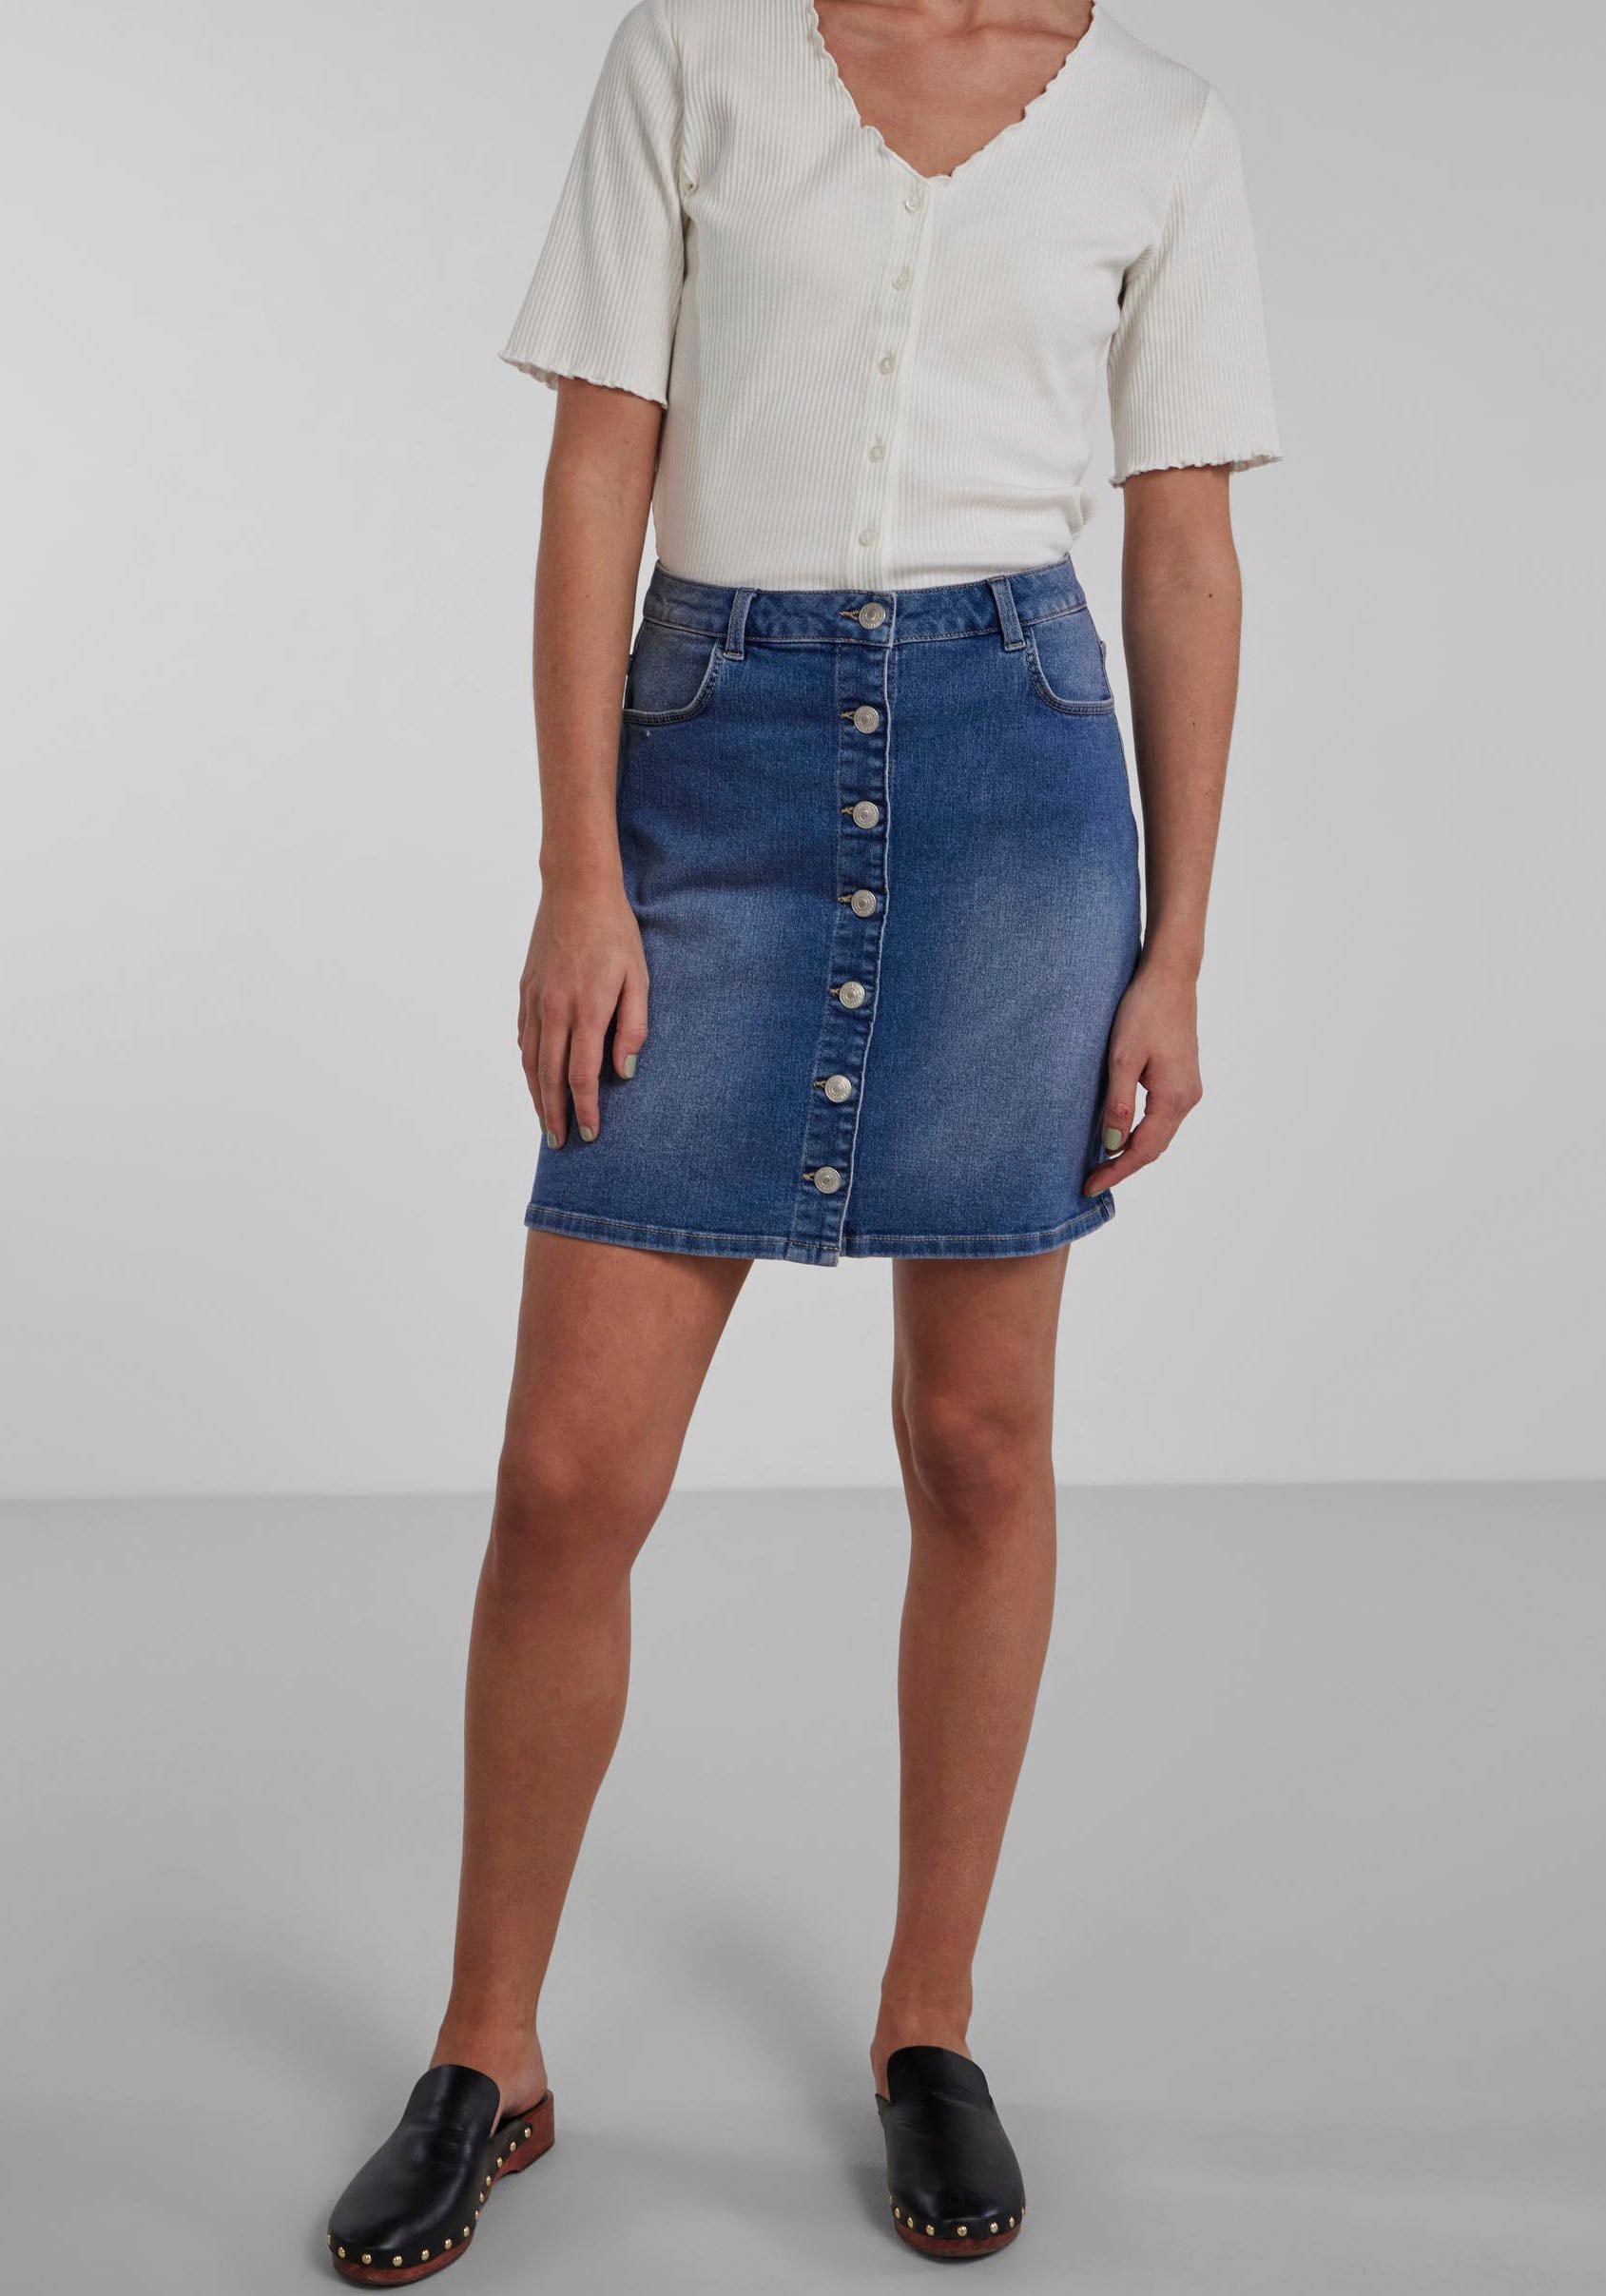 bei »PCPEGGY NOOS pieces SKIRT Jeansrock OTTOversand BC« HW